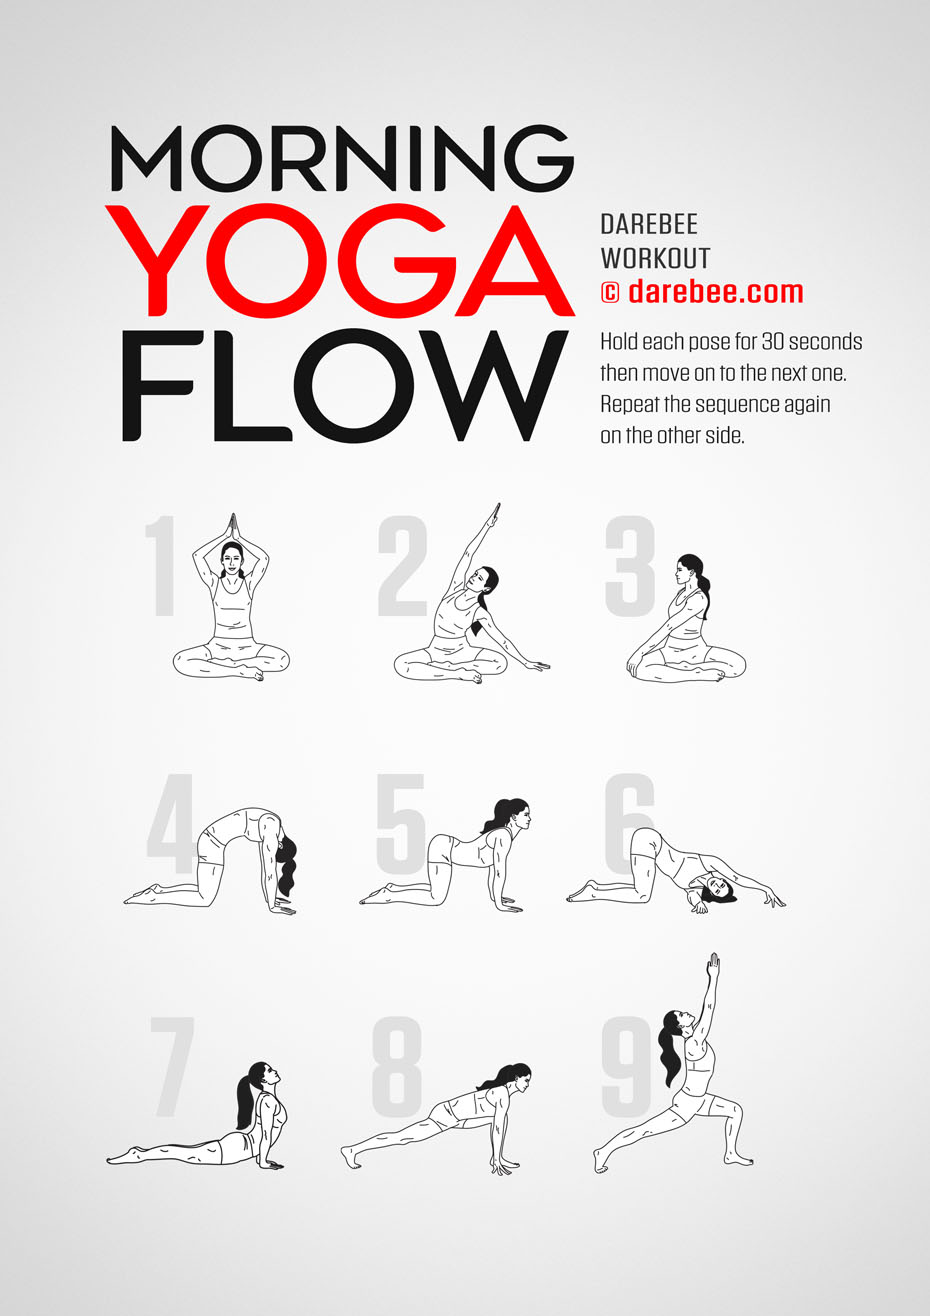 Morning Yoga Flow is a Darebee yoga-based no-equipment, feel-good workout that will lift your spirits and energize your body.